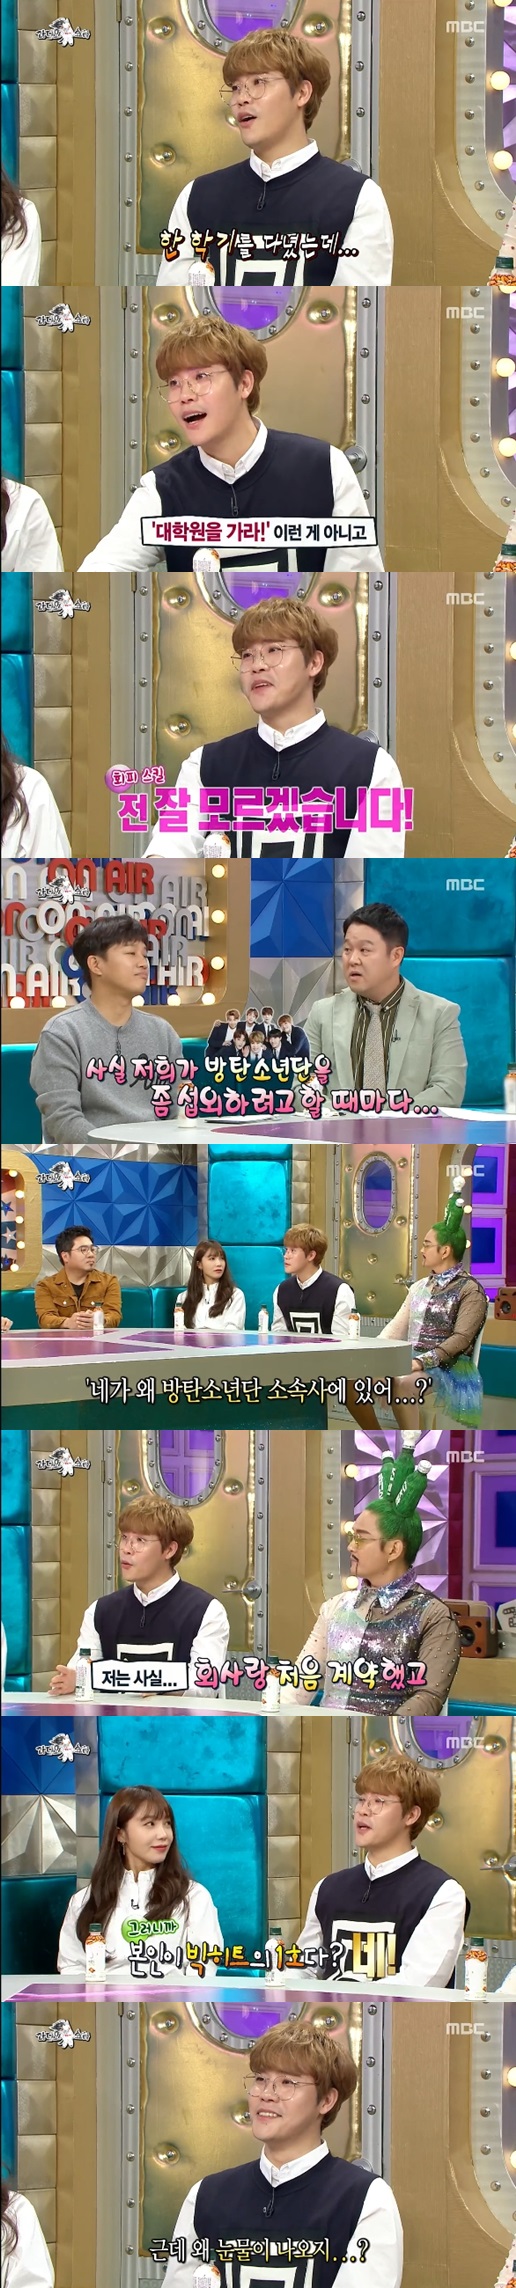 Singer Lee Hyun boasted that he was the first singer of Big Hit Entertainment.MBC Radio Star broadcasted on the night of the 24th was featured in Any Way Singer Story Y feature, and singer Solid Kim Jo Han, group A Pink Jung Eunji, singer Lee Hyun and Norajo Jobin appeared.Lee Hyun, who identified himself as The Rookie of Big Hit, said, I quit the Harvard Business School.I went to a semester and it did not fit with me, he said. From the beginning, I did not say go to graduate school in (big hit), but I was a little bit sad for the company.In particular, Big Hit Entertainment is a subsidiary of the group BTS, which is currently the most popular globally, so the public is also interested.Lee Hyun said, Everyone says, Why are you in BTS company? But in fact, I was in the company since I first signed the company.Its the big hit No. 1 singer, he said, making a laugh.